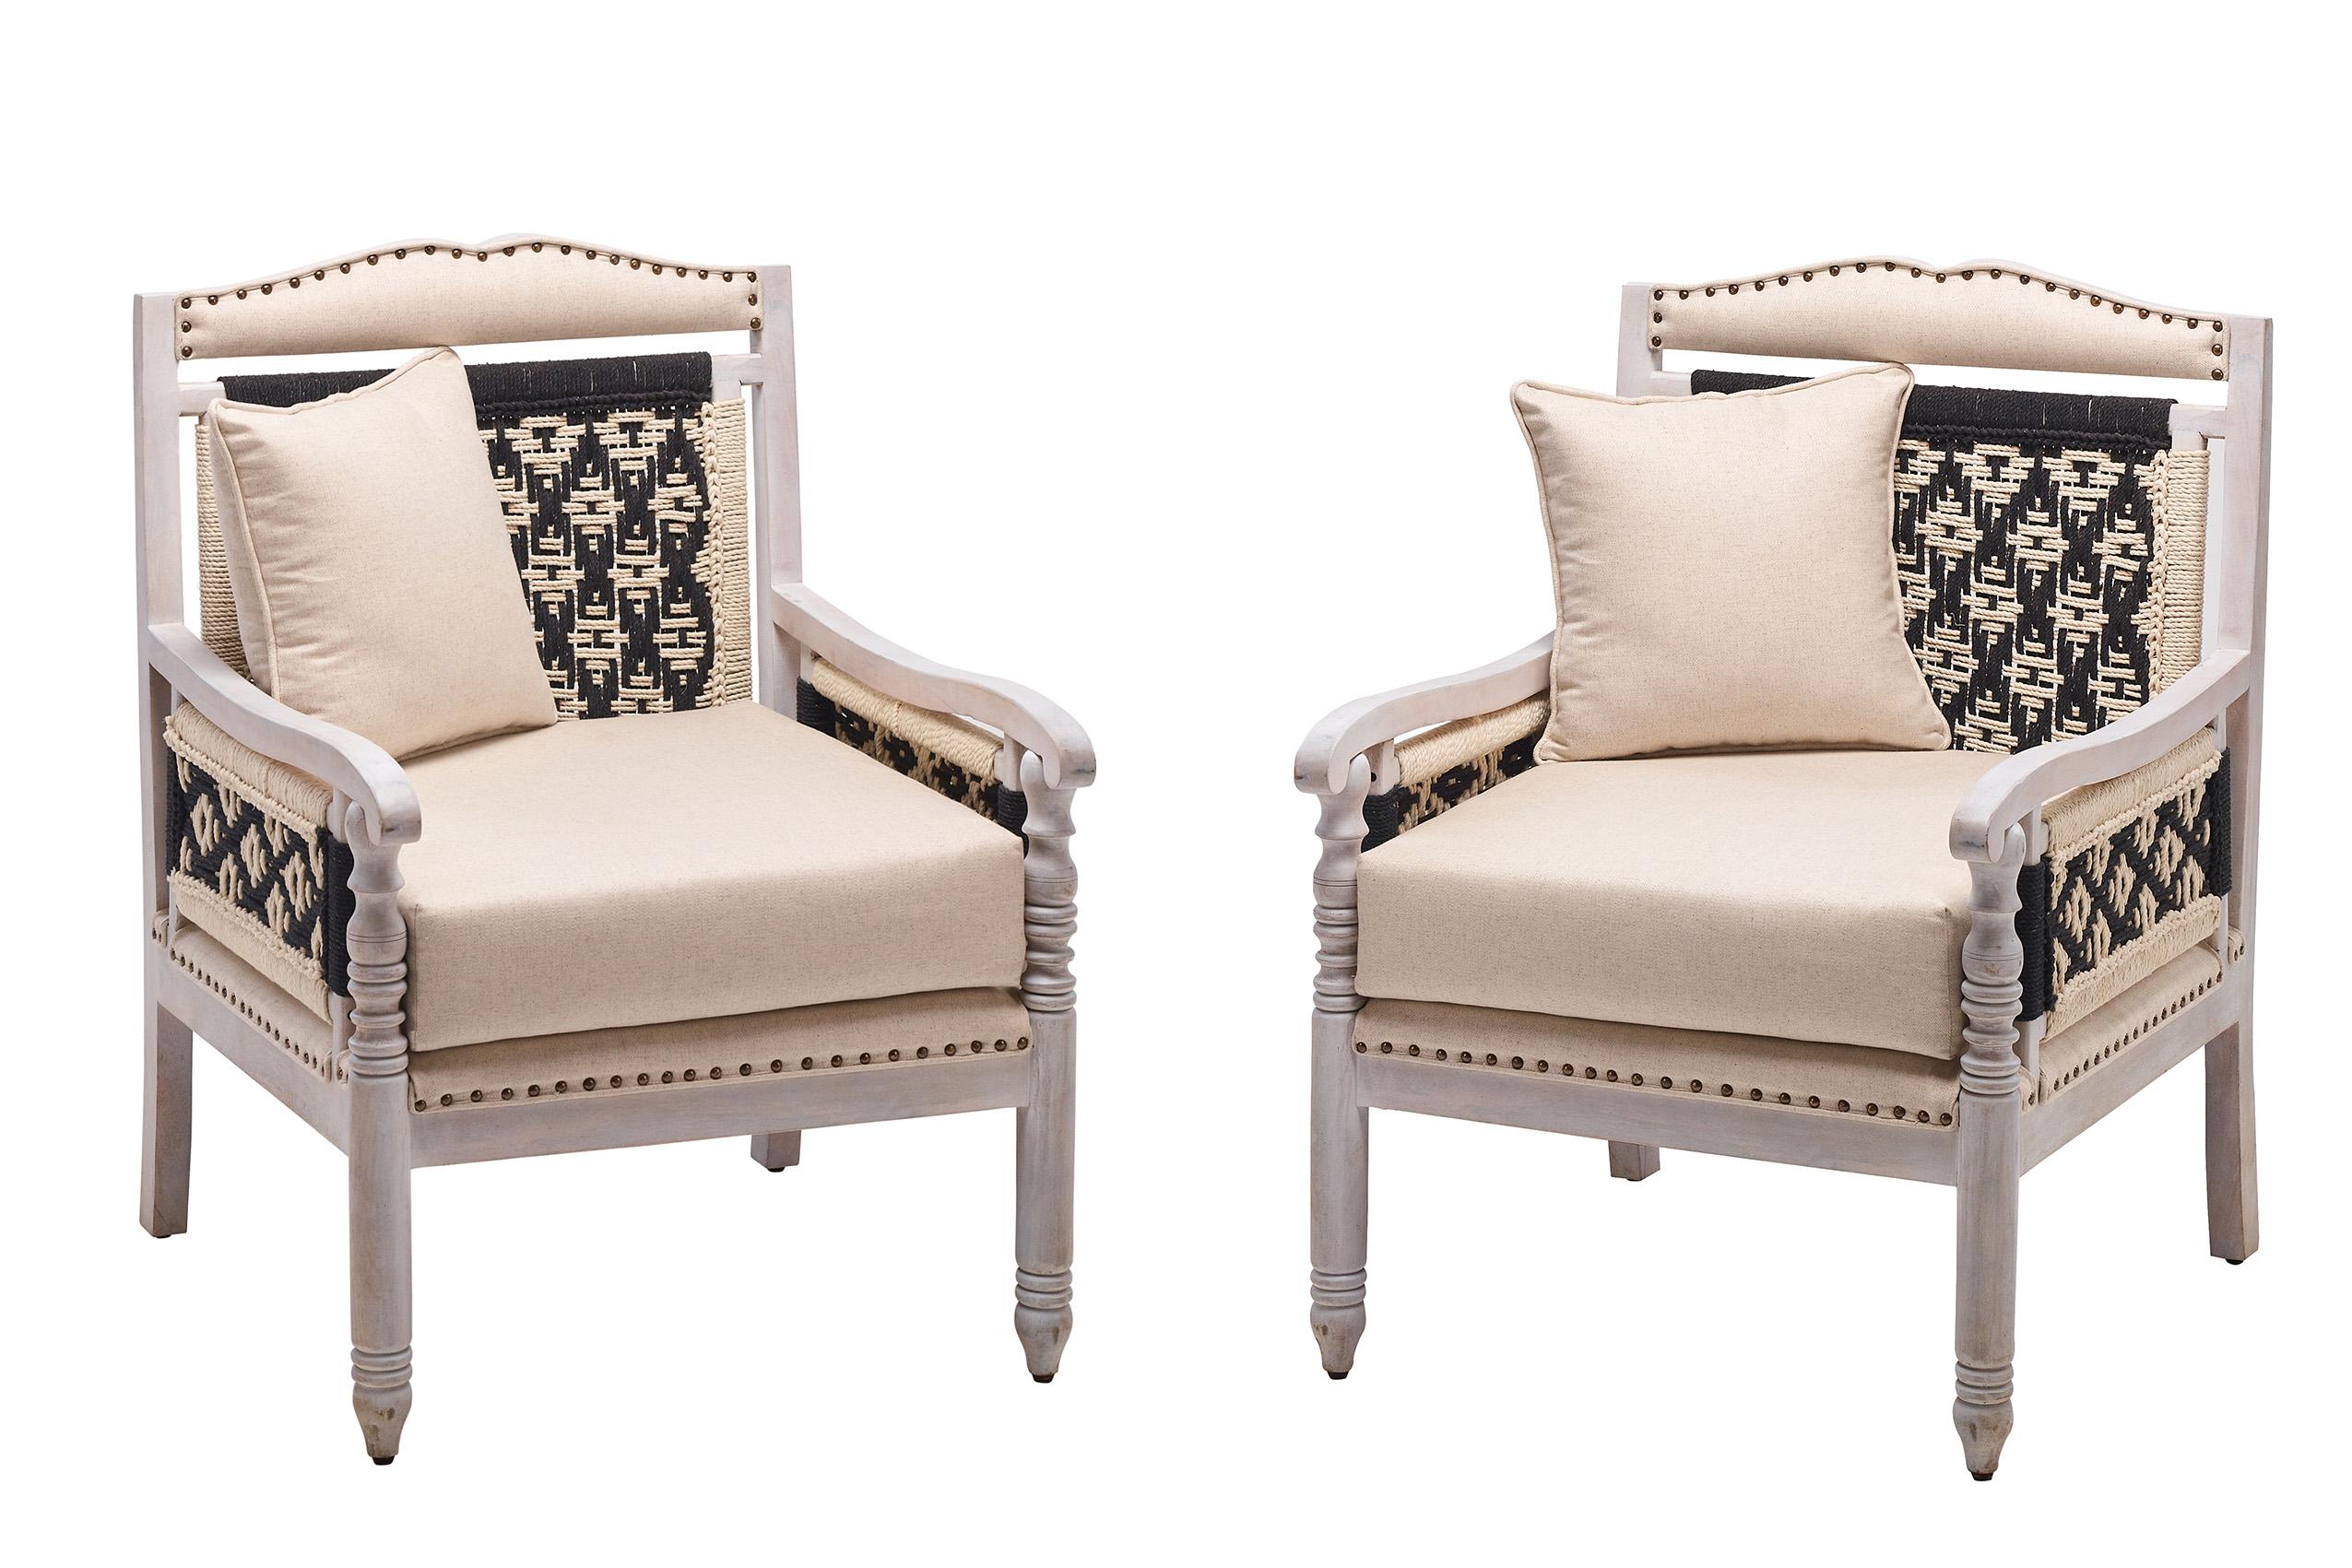 Classic Arm Chair Set CAC-81023 Set-2 CAC-81023-Set-2 in Black, Beige Fabric